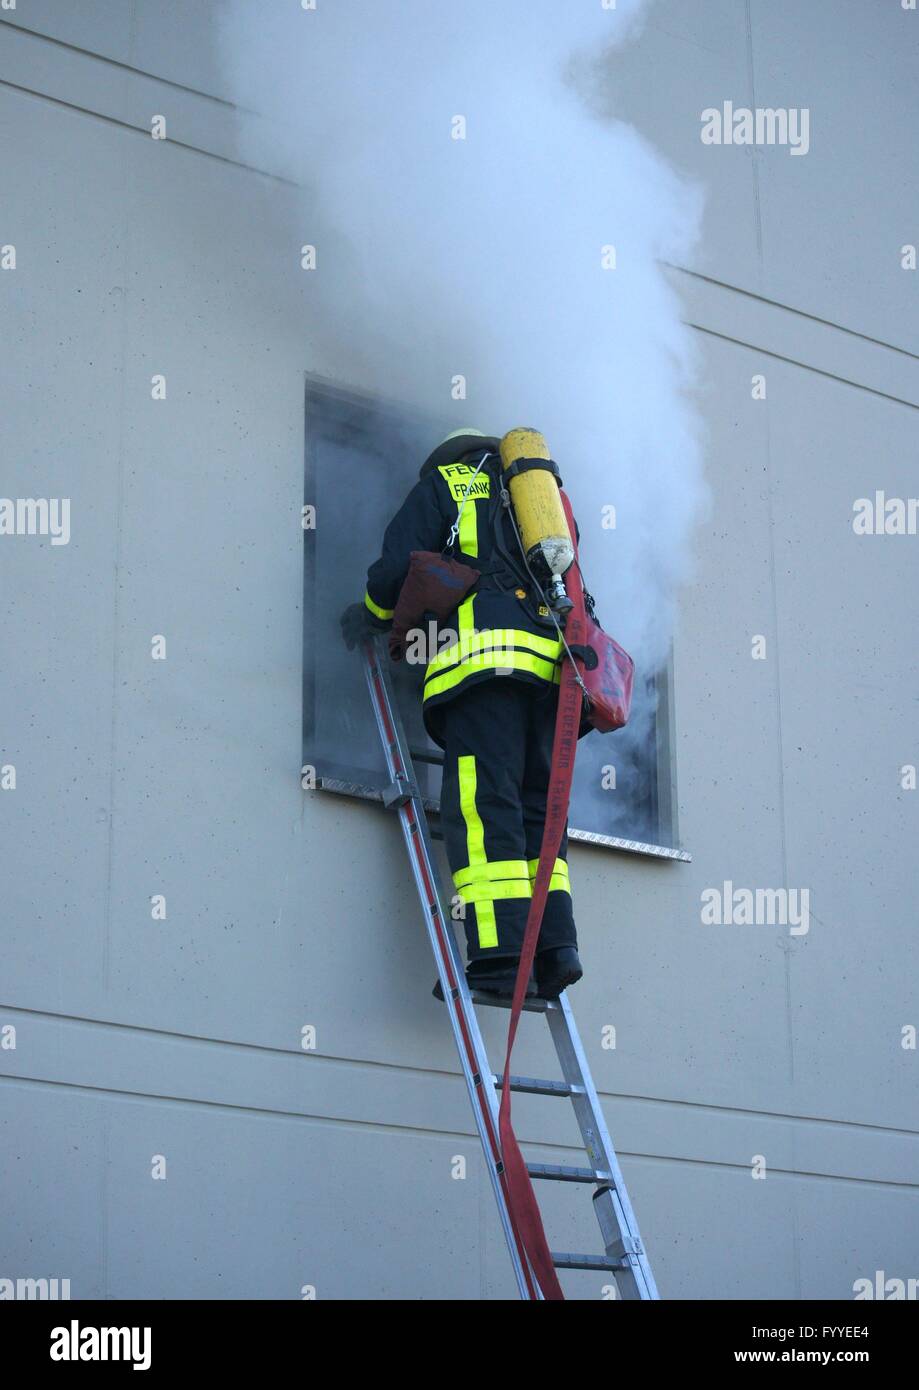 Emergency services exercise of the Frankfurt fire brigade on april-09-2016. A fireman with breathing protection equipment try to enter a smoky building. Stock Photo